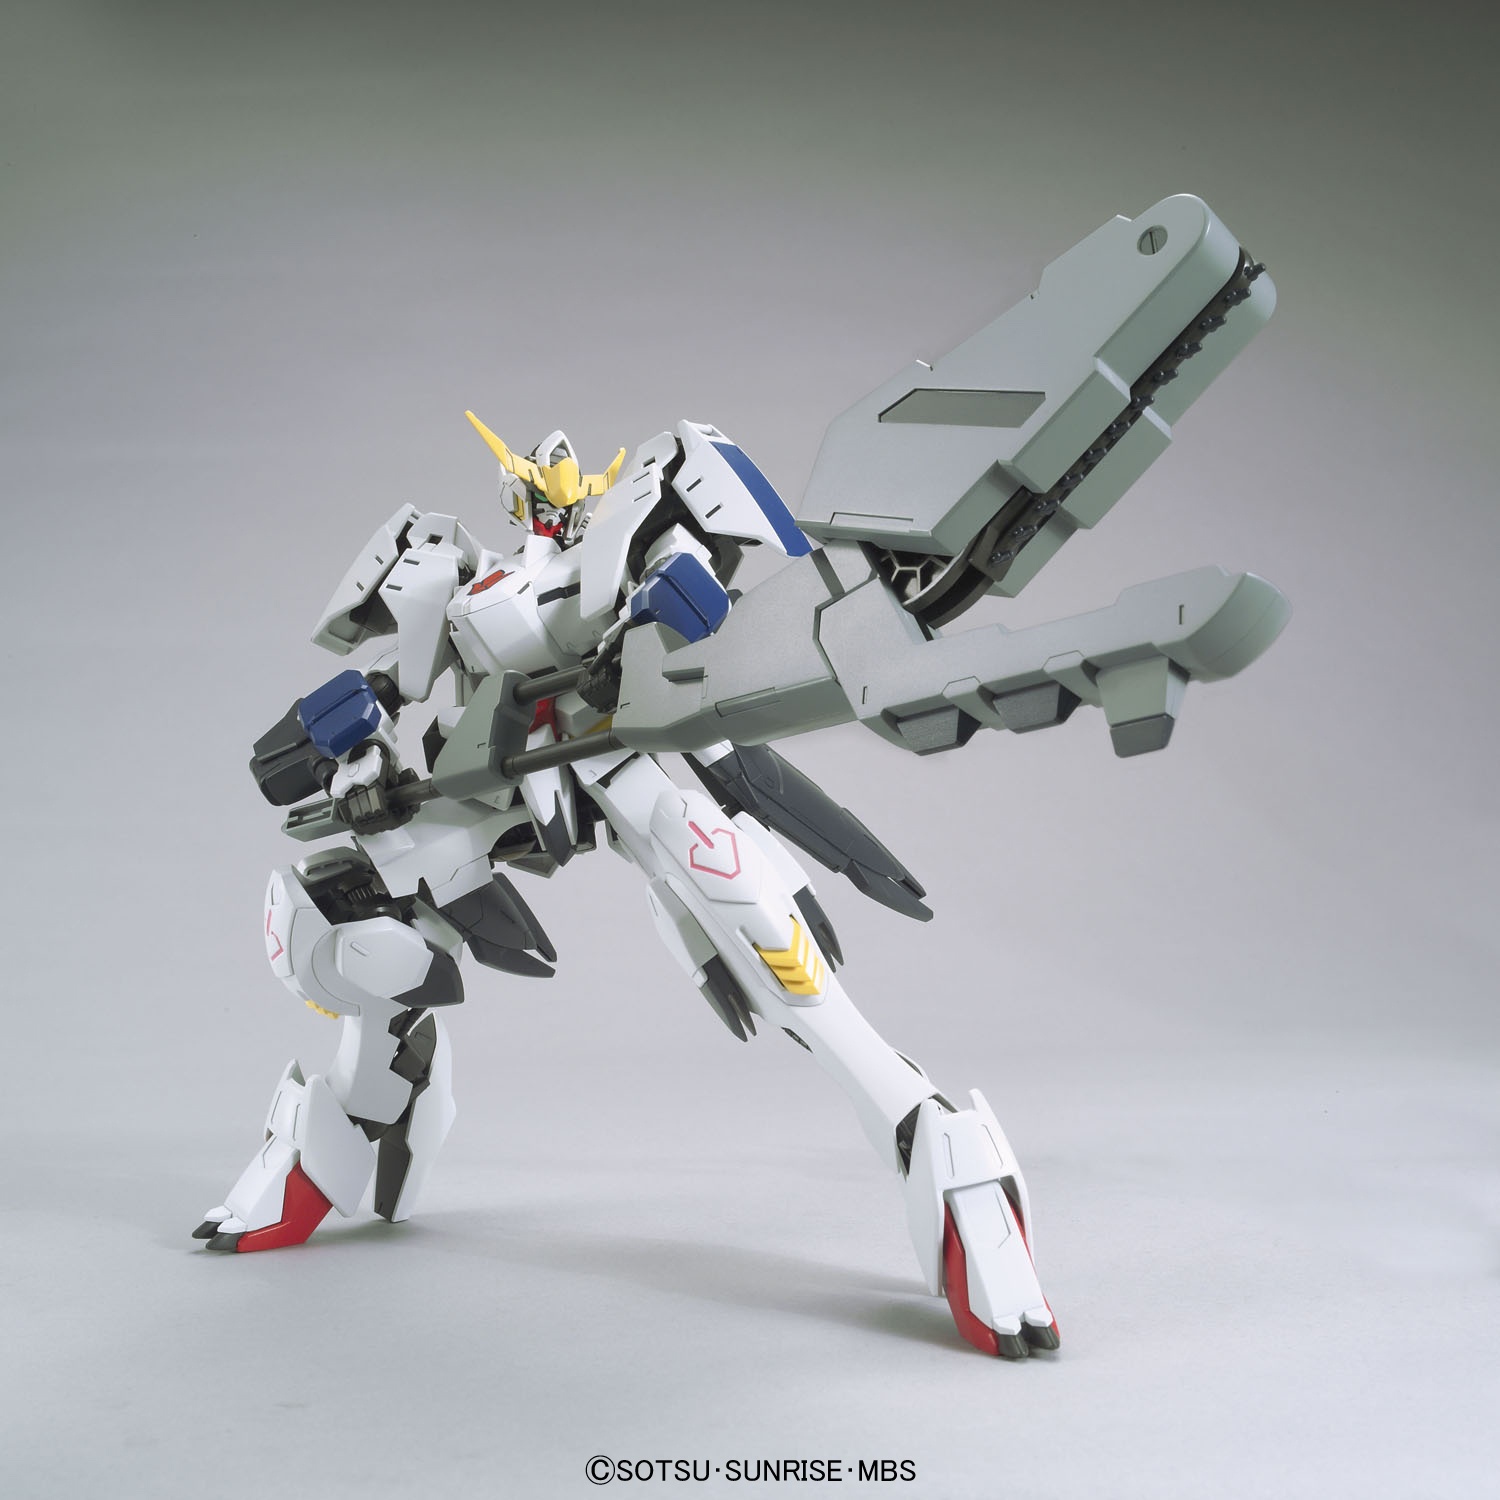 Bandai Limited HG 1144 Gundam Barbatos 6th Form Clear Color Model Kit for sale online 